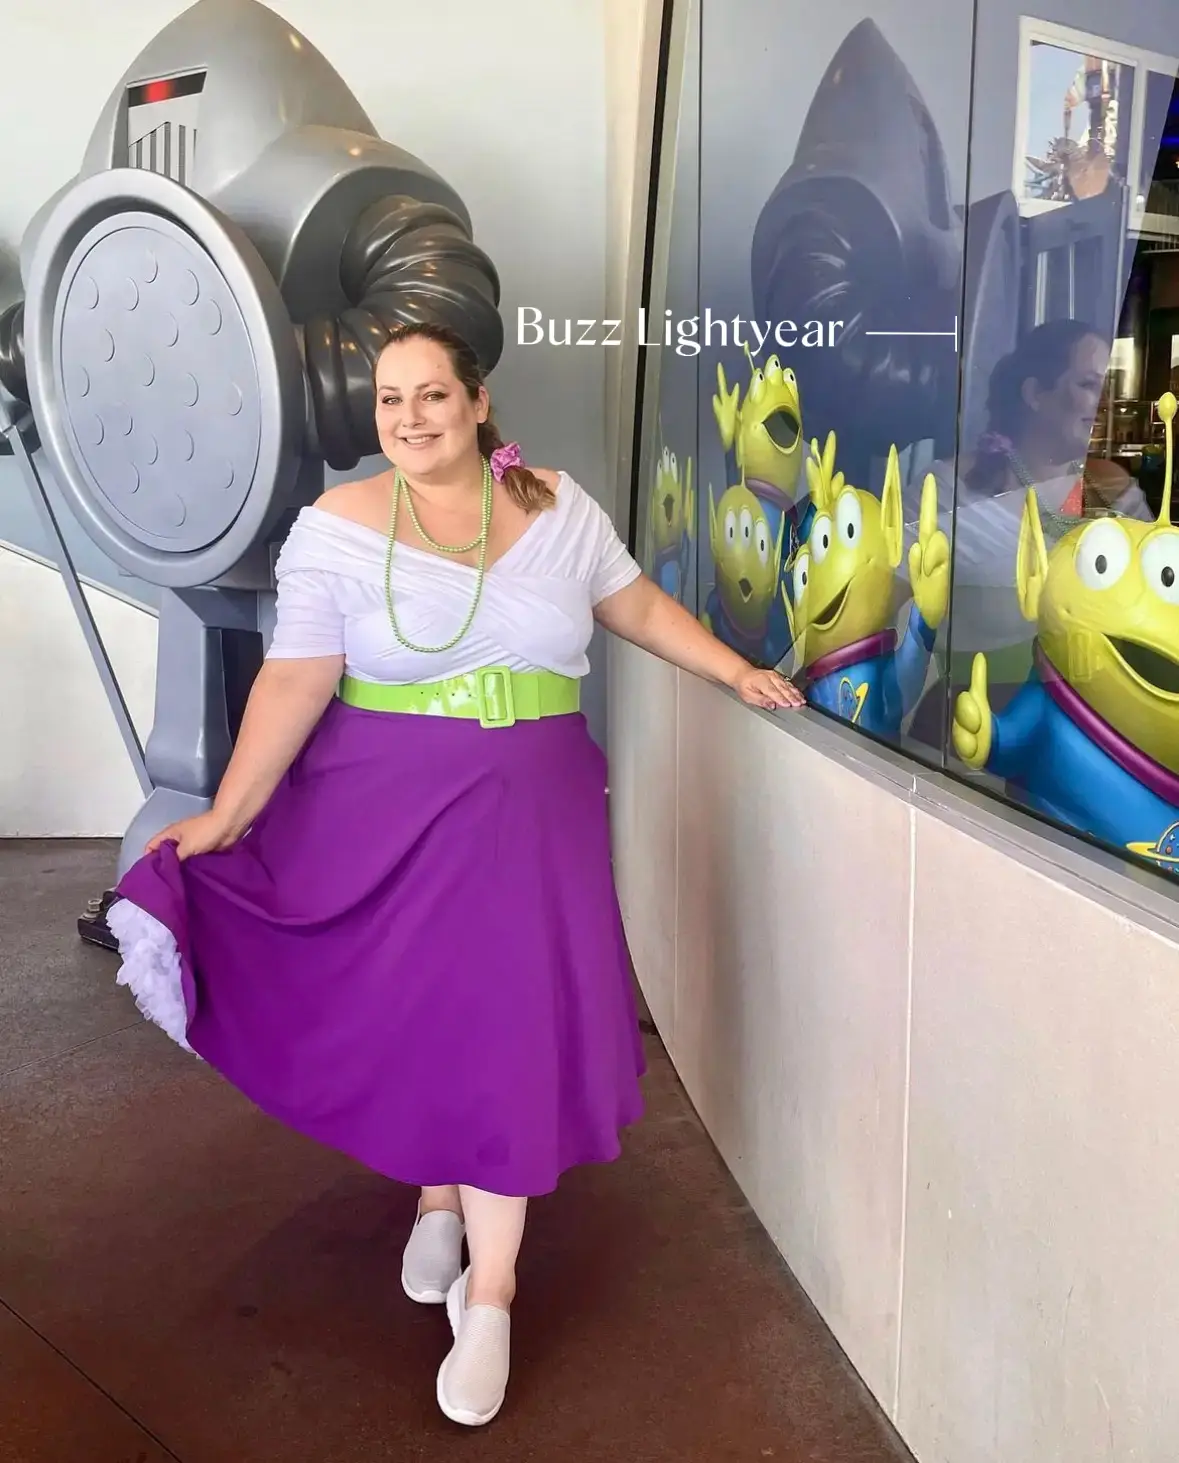 Plus size dapper day outfits for Disneyland, Gallery posted by  CassieColorful